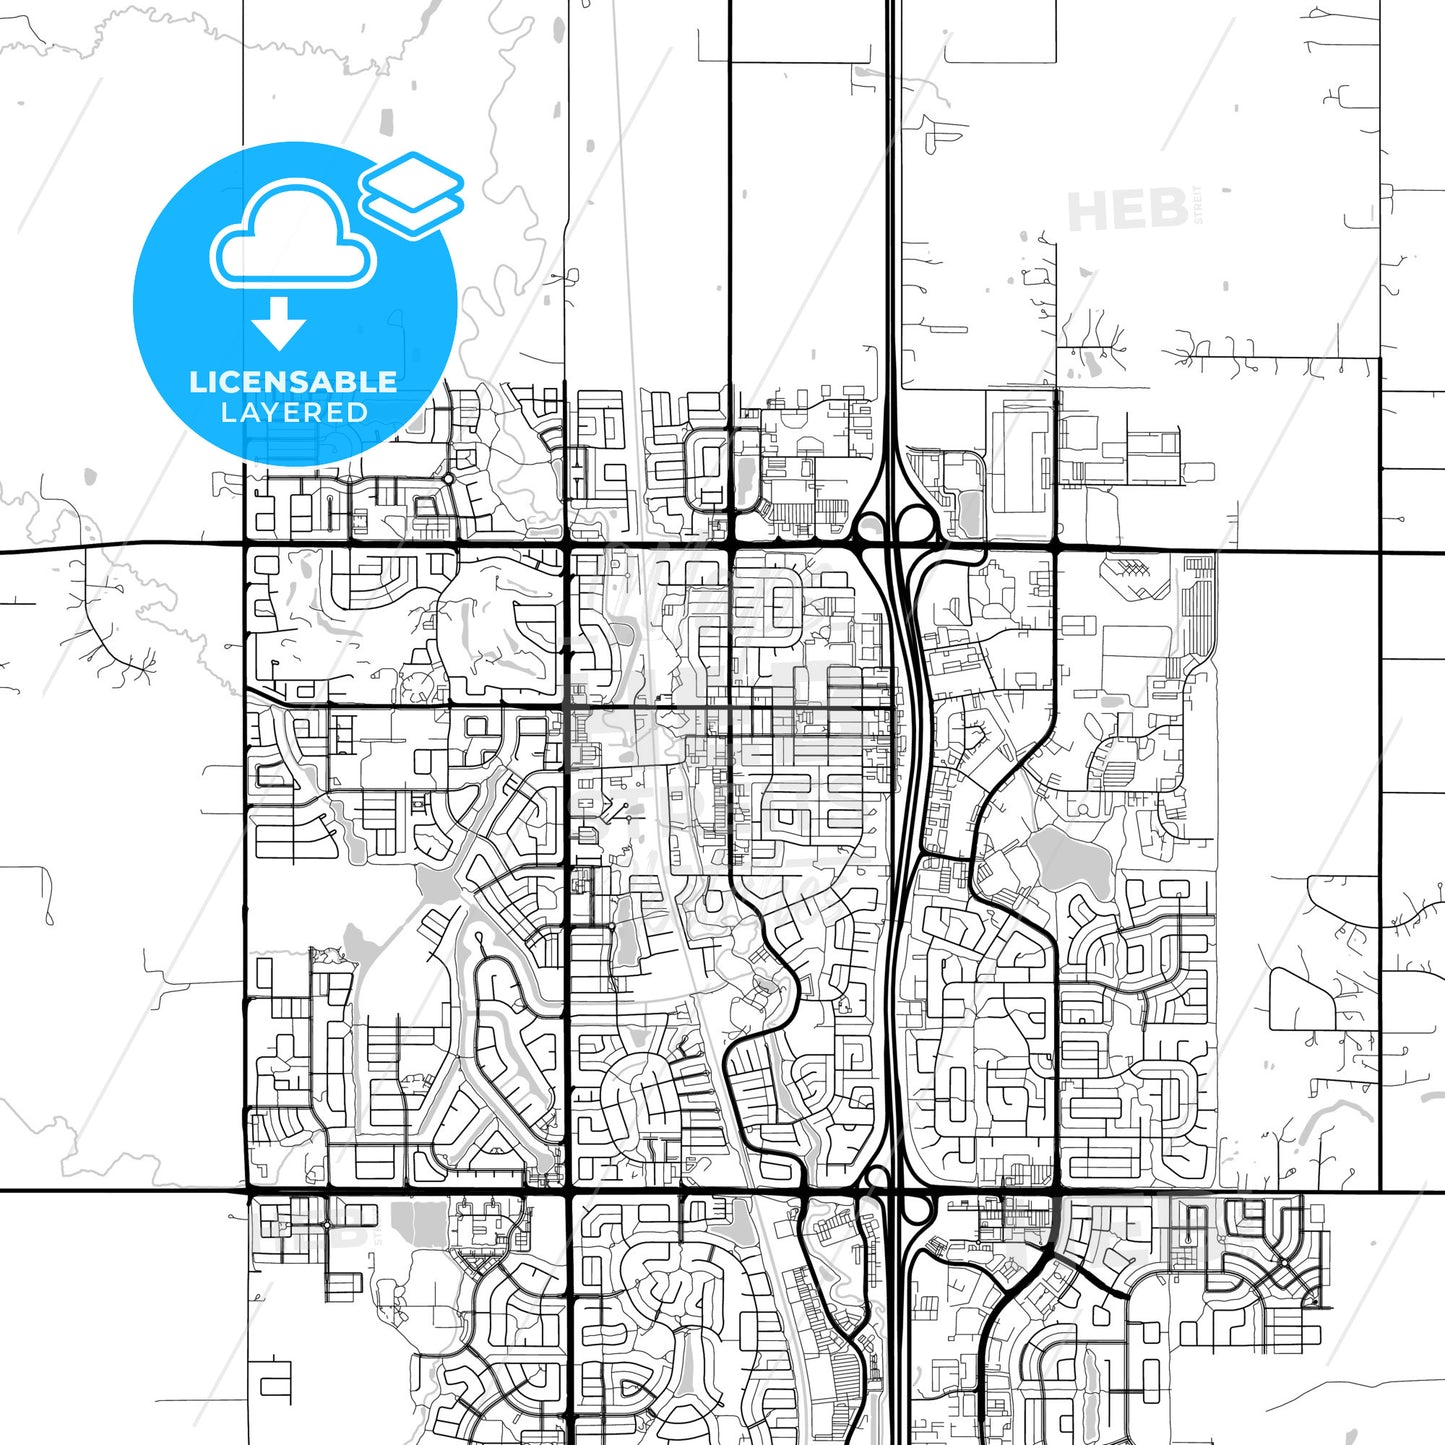 Layered PDF map of Airdrie, Alberta, Canada